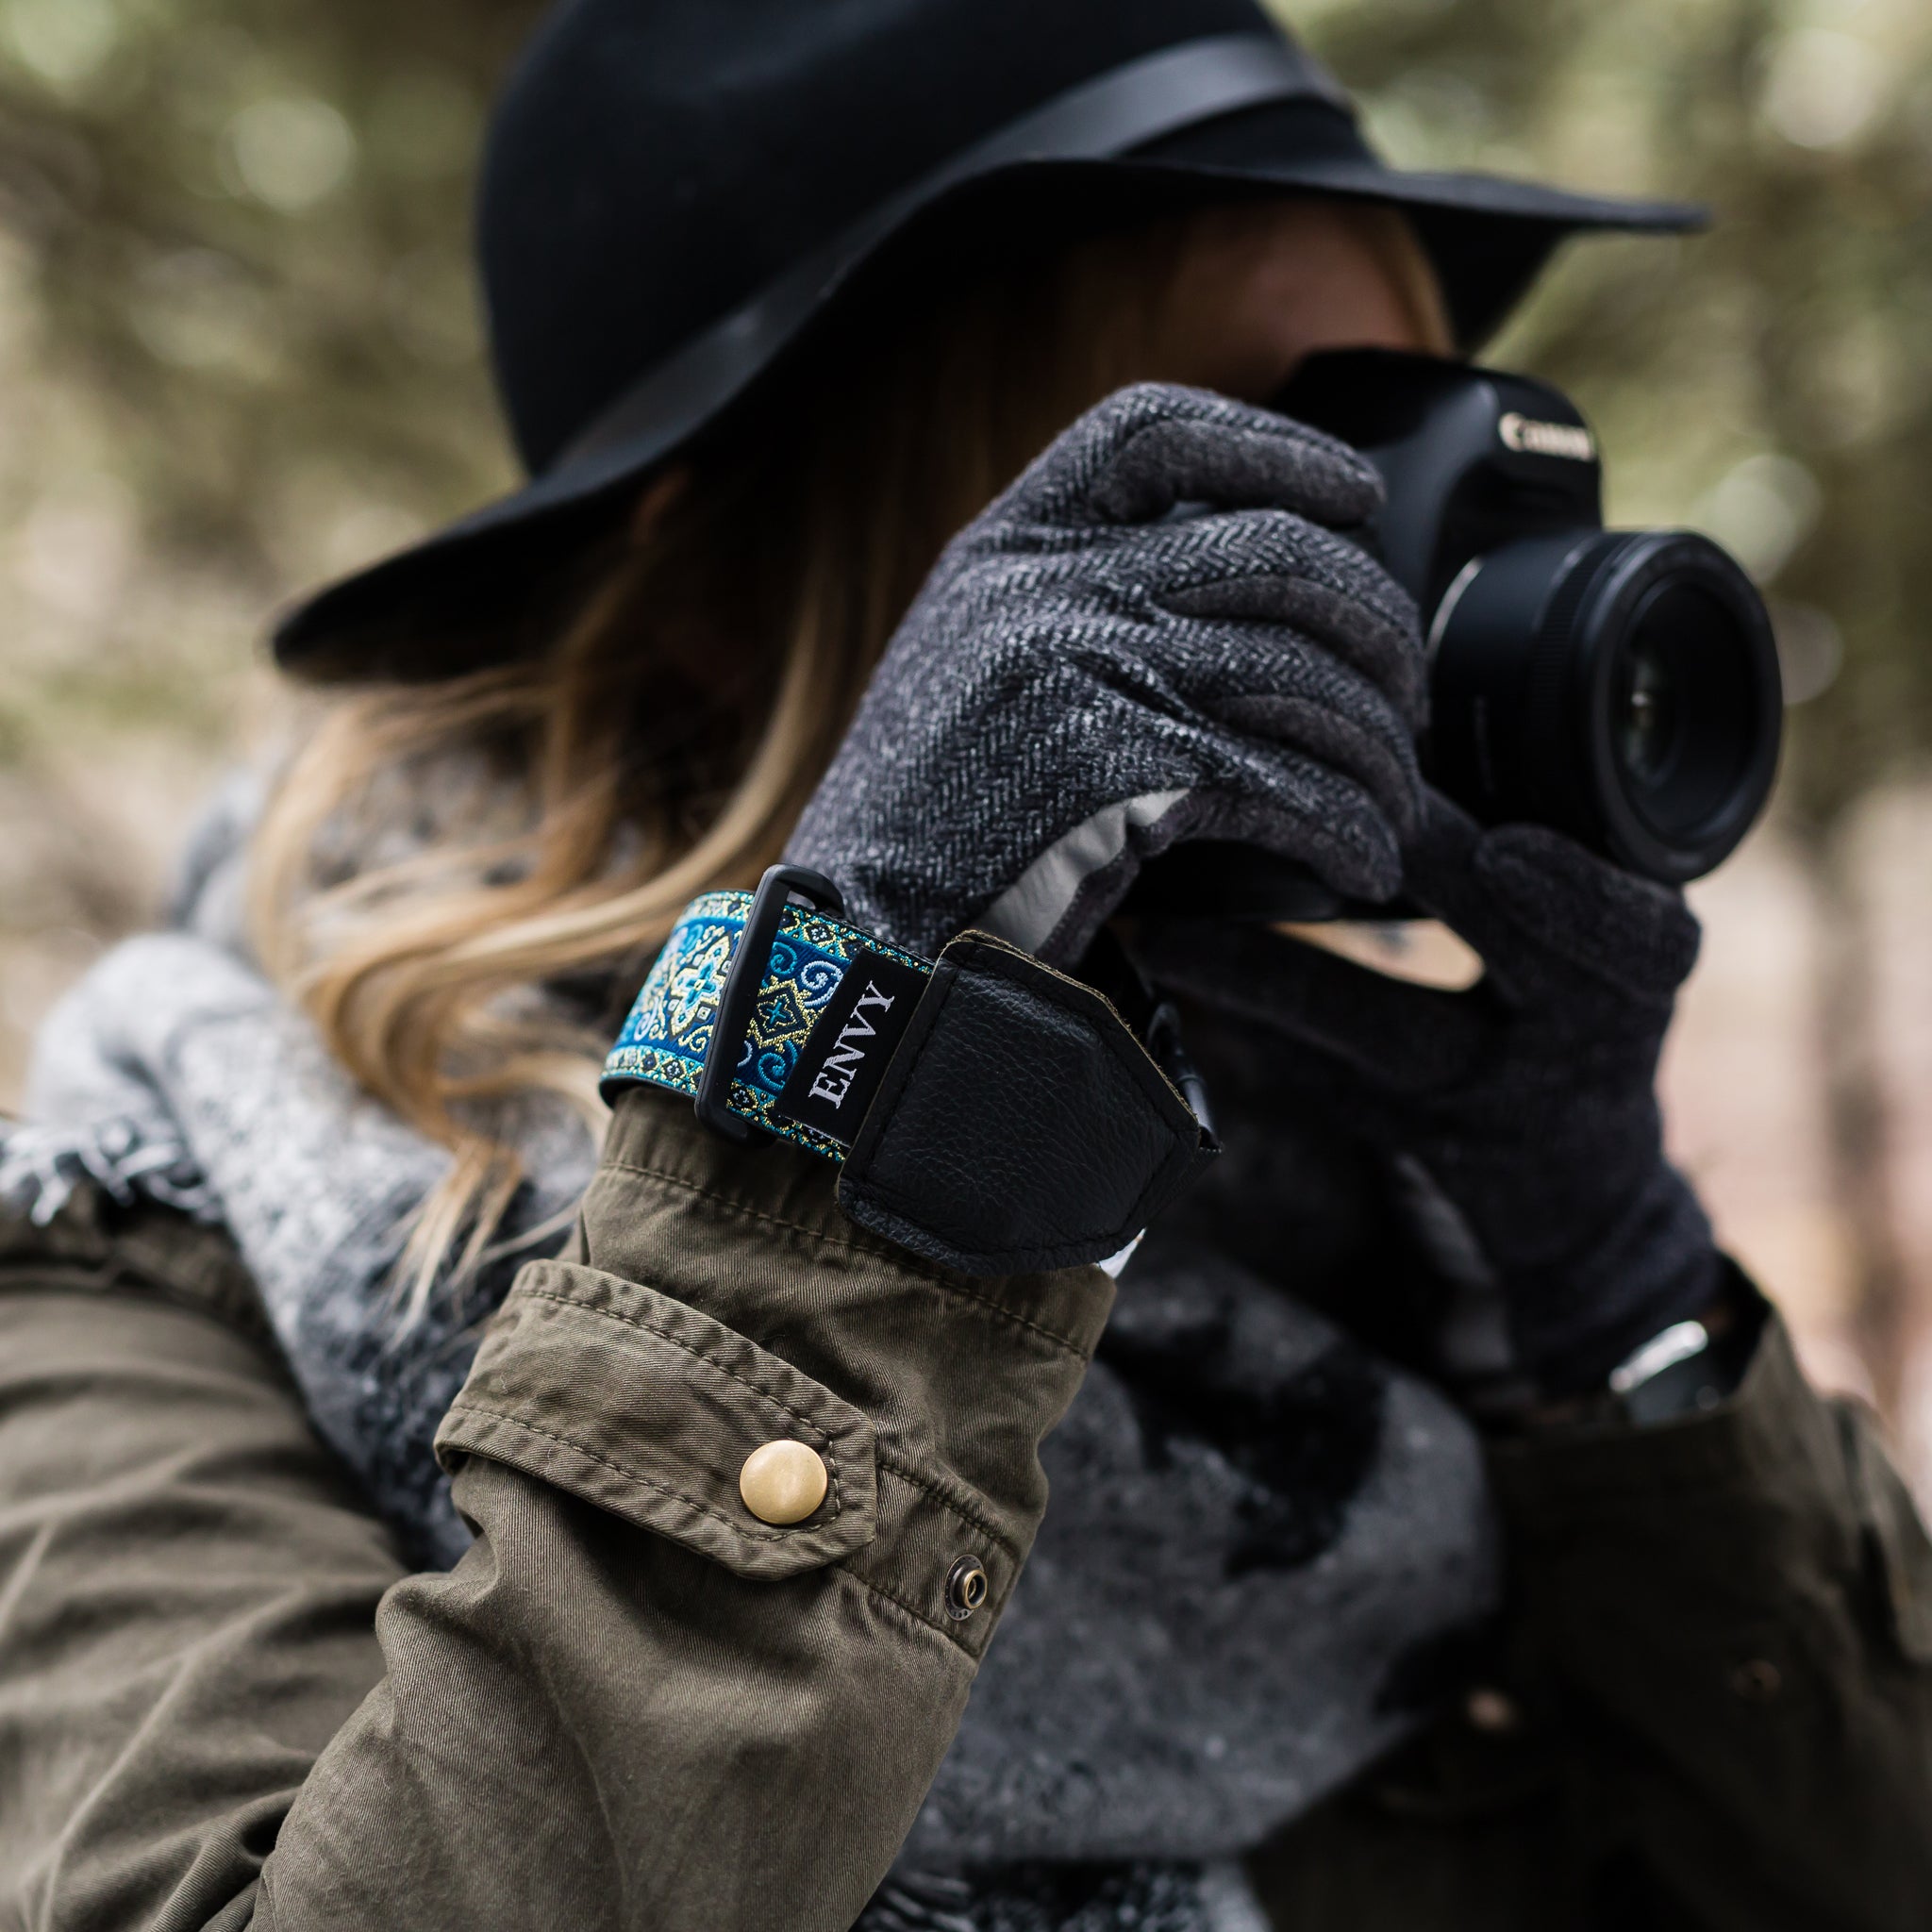 Image of a photographer using a My Fave Camera Wrist Strap